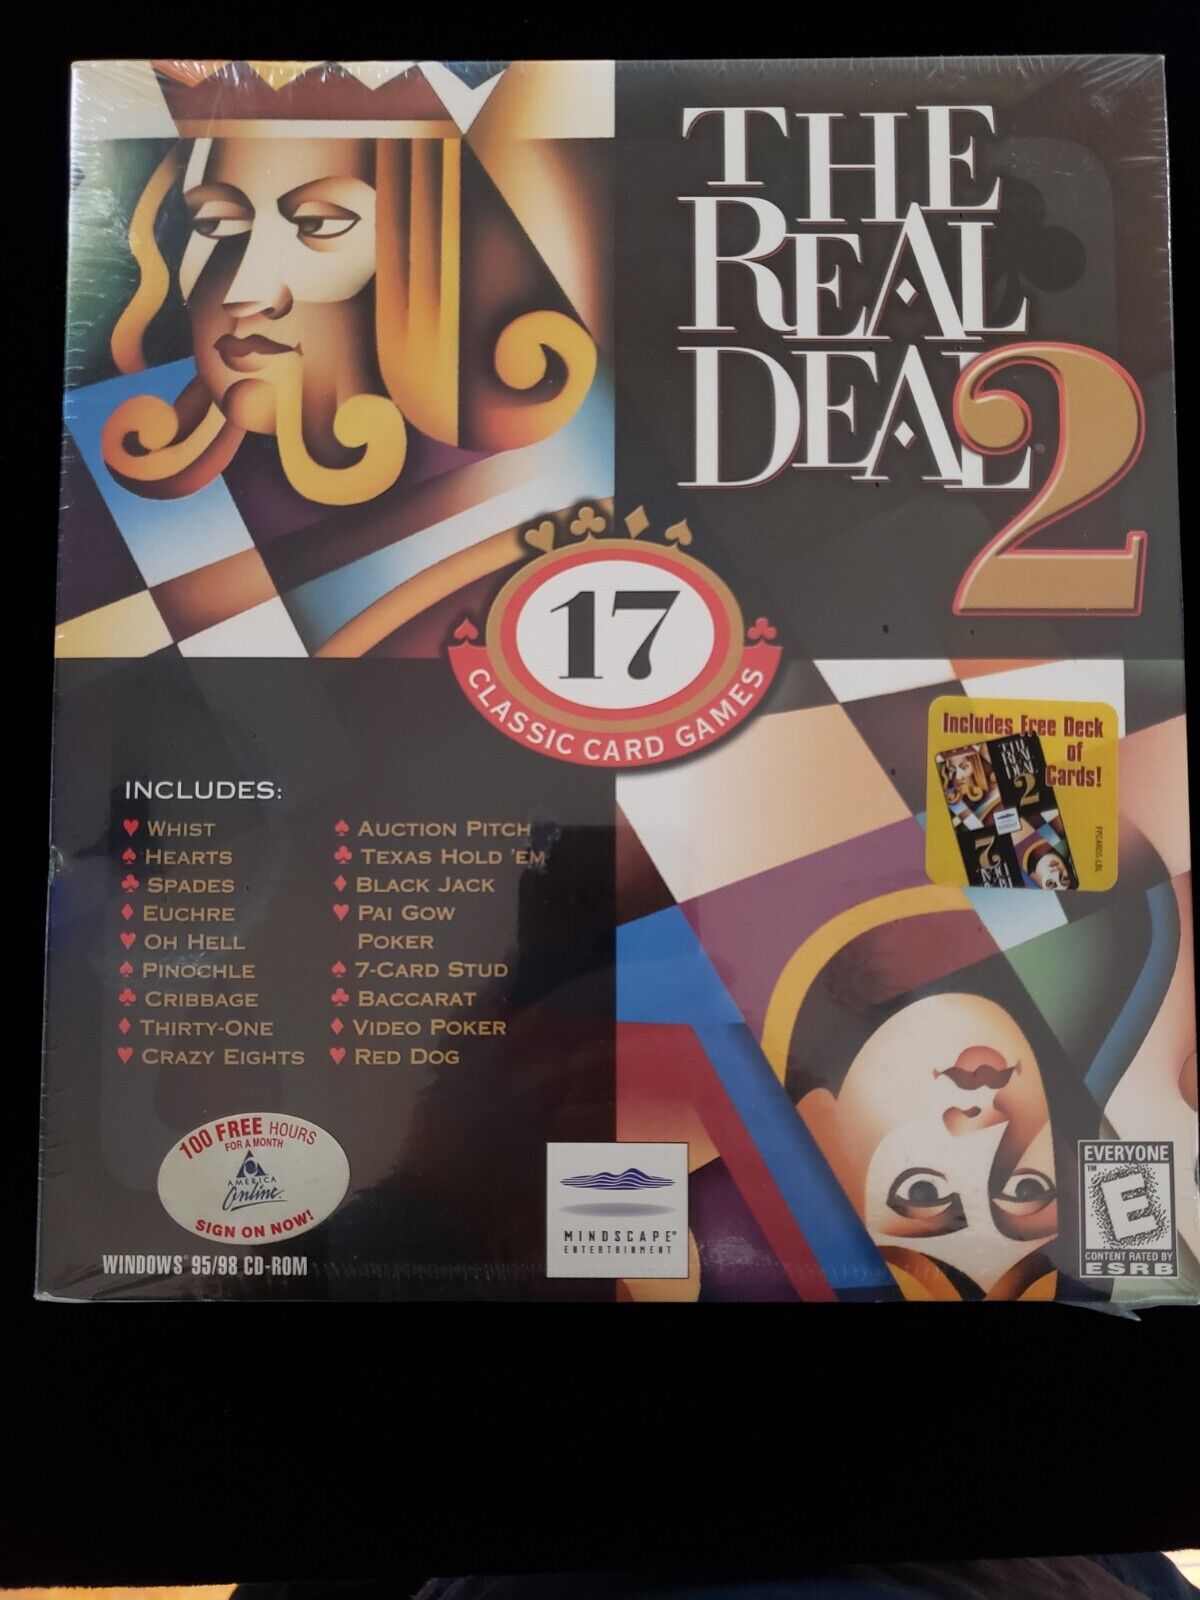 SEALED The Real Deal 2 17 Classic Card Games PC CD Mindscape Windows 95/98 new